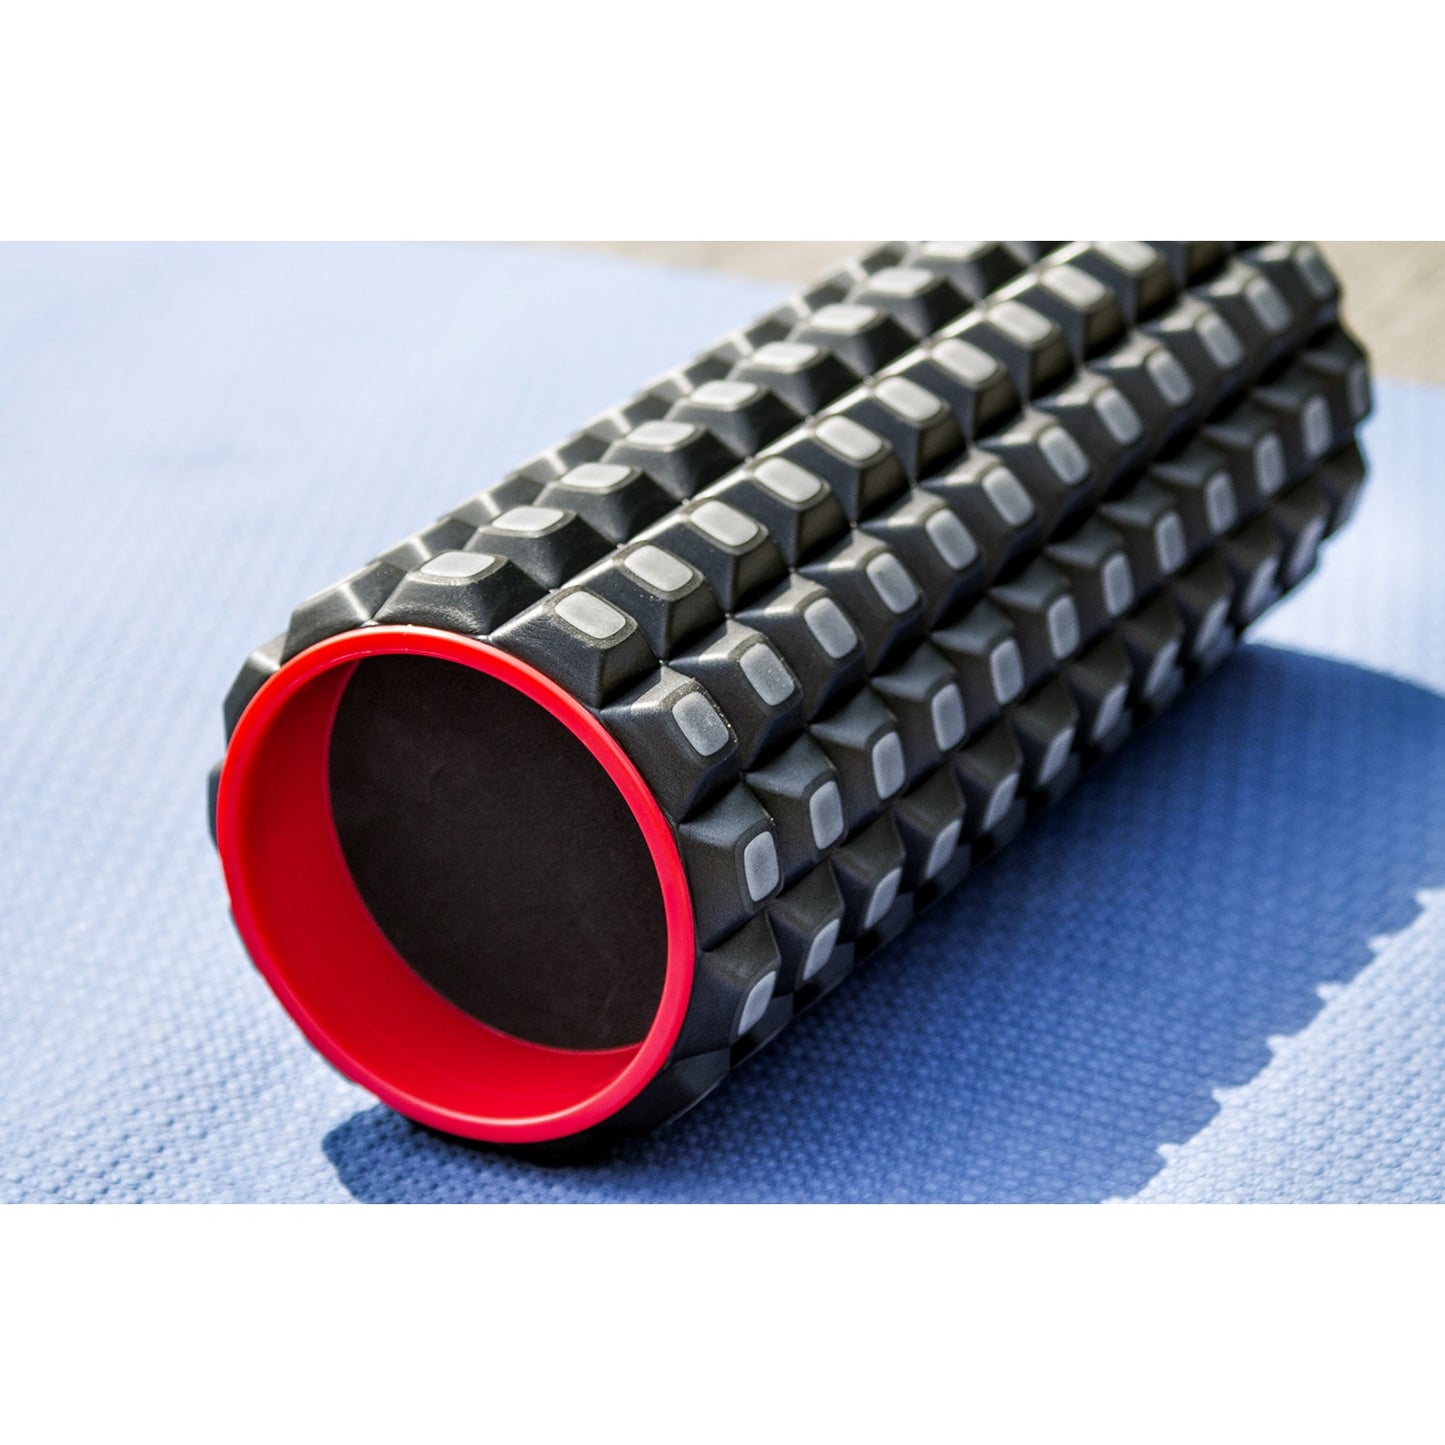 Solid Muscle Massage Roller by YOGA Accessories